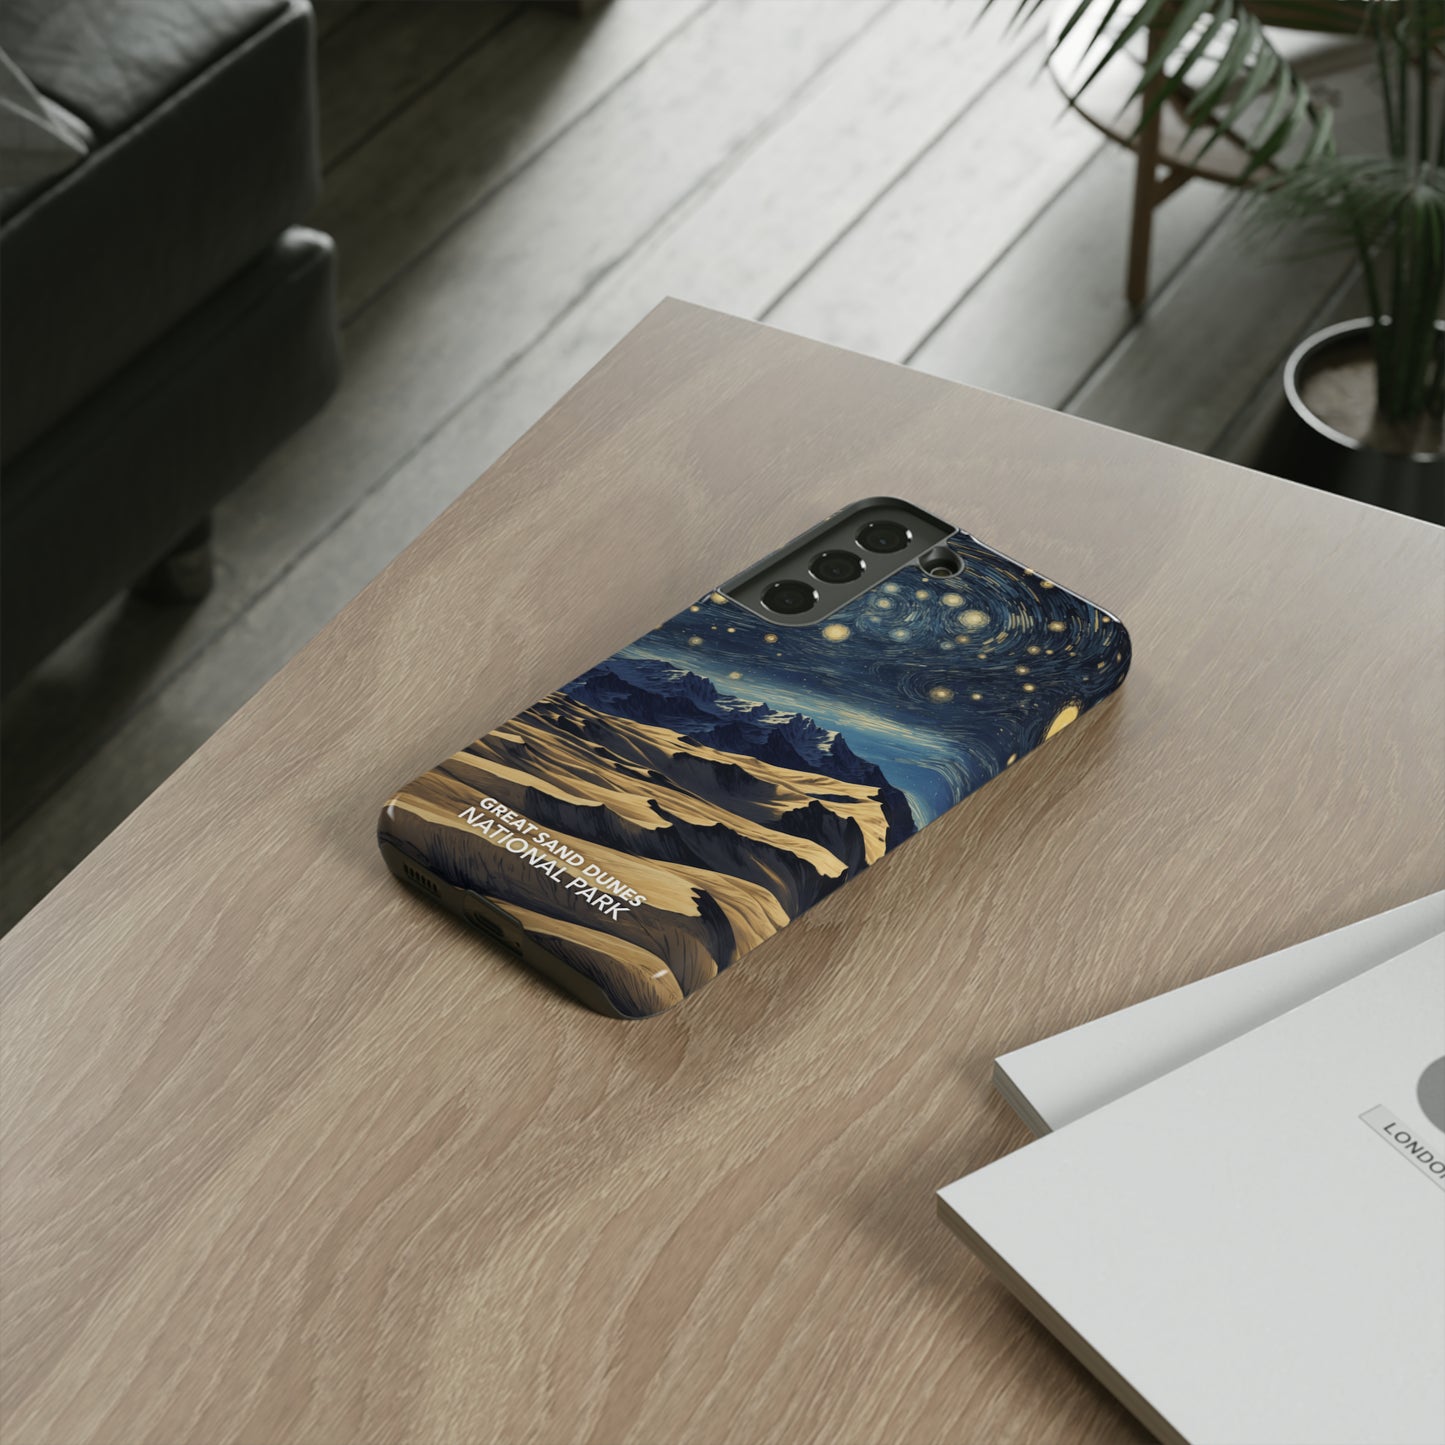 Great Sand Dunes National Park Phone Case - Starry Night